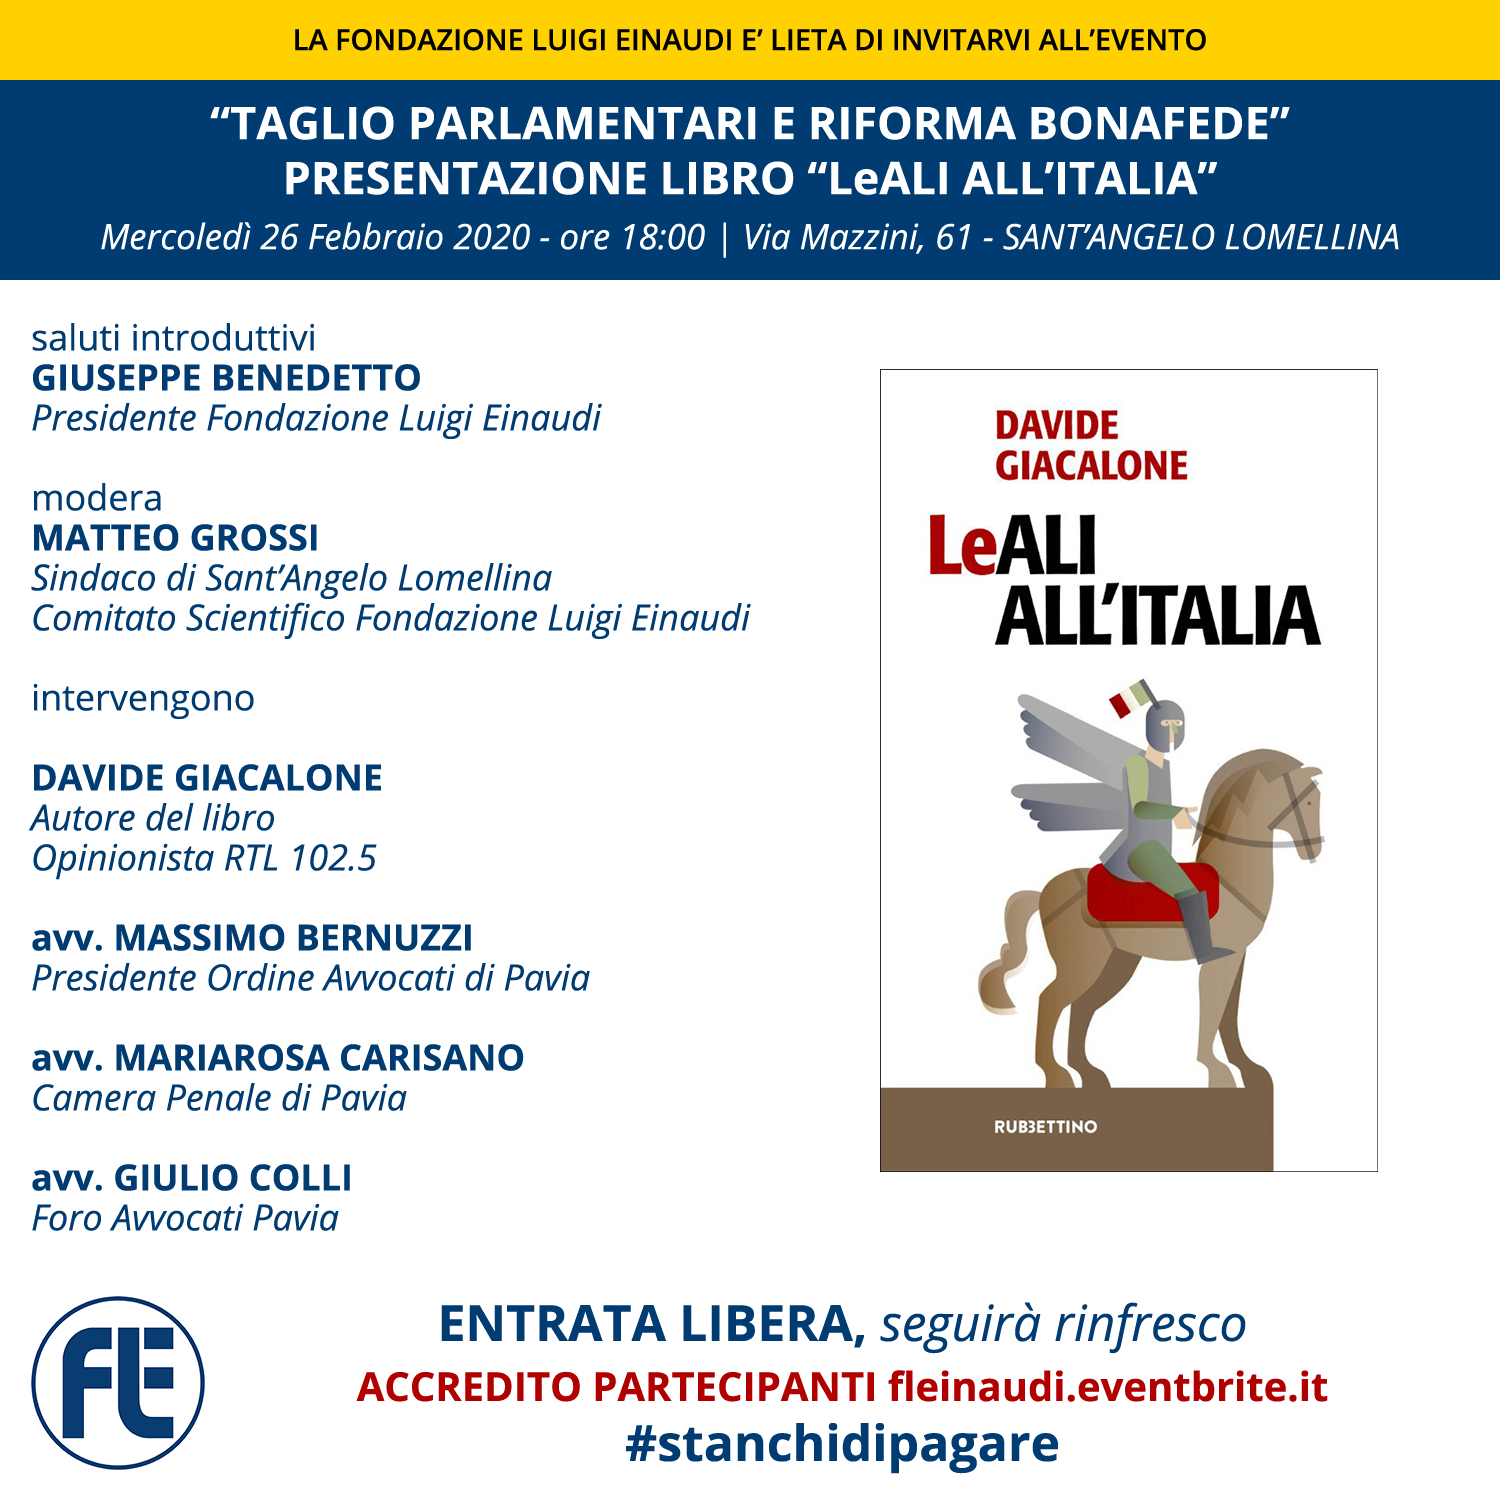 Reduction in the number of Members of Parliament and ‘Bonafede Reform’. Book presentation: “LEALI ALL’ITALIA” by Davide Giacalone #STANCHIDIPAGARE – EVENT POSTPONED